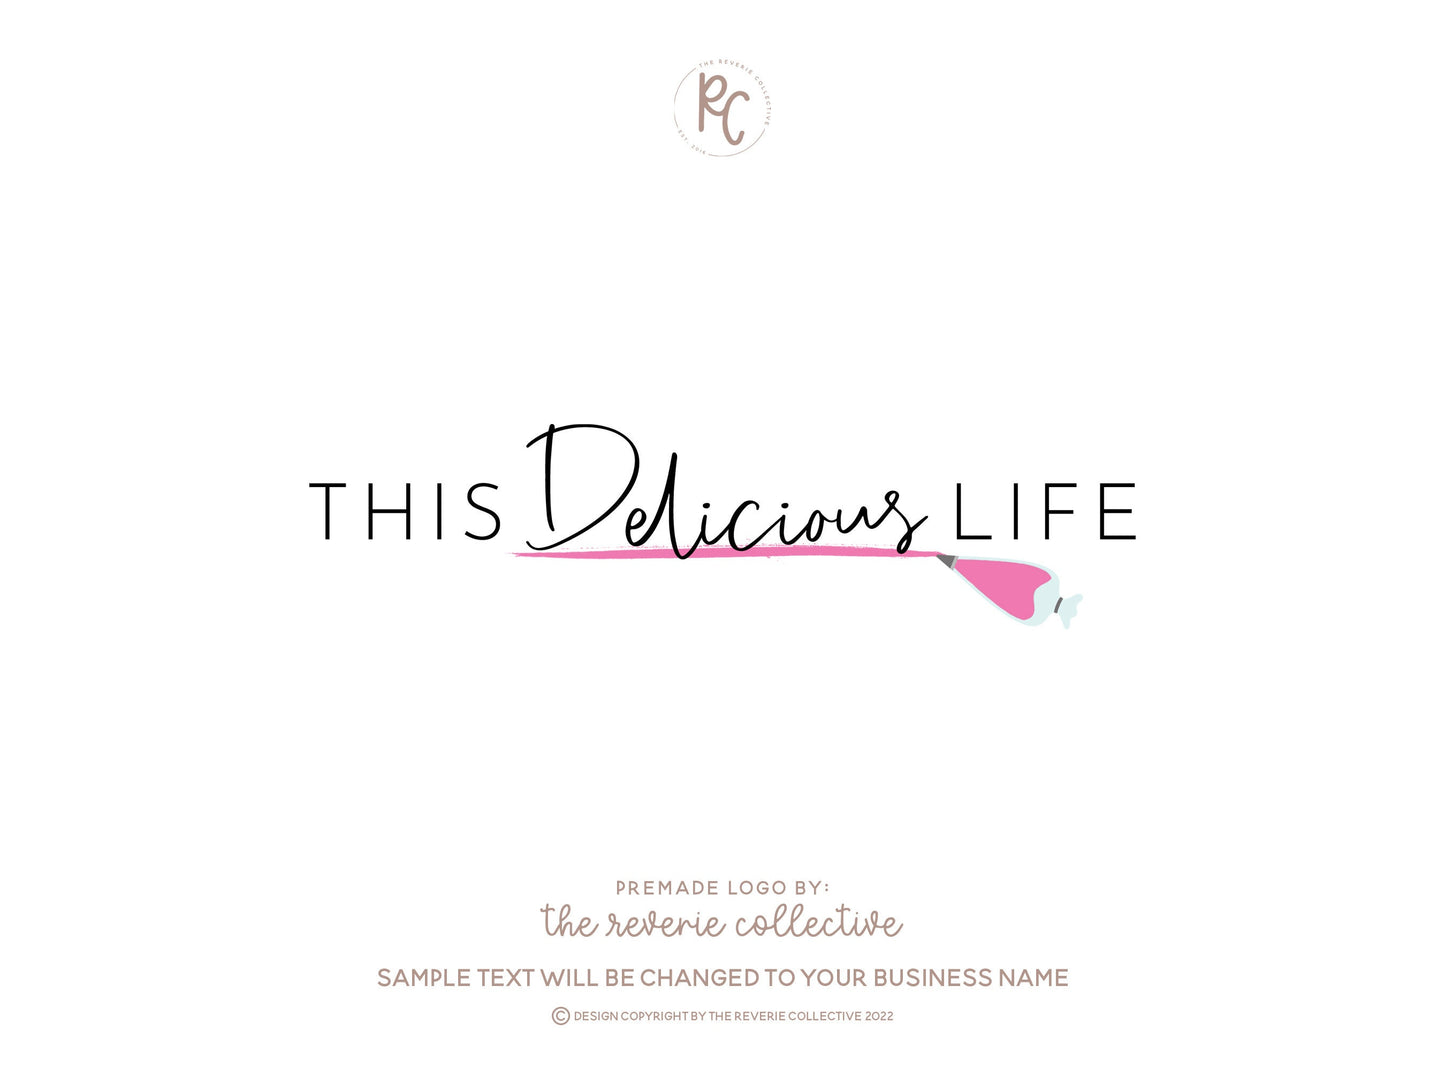 This Delicious Life | Premade Logo Design | Baking, Icing, Frosting, Blog